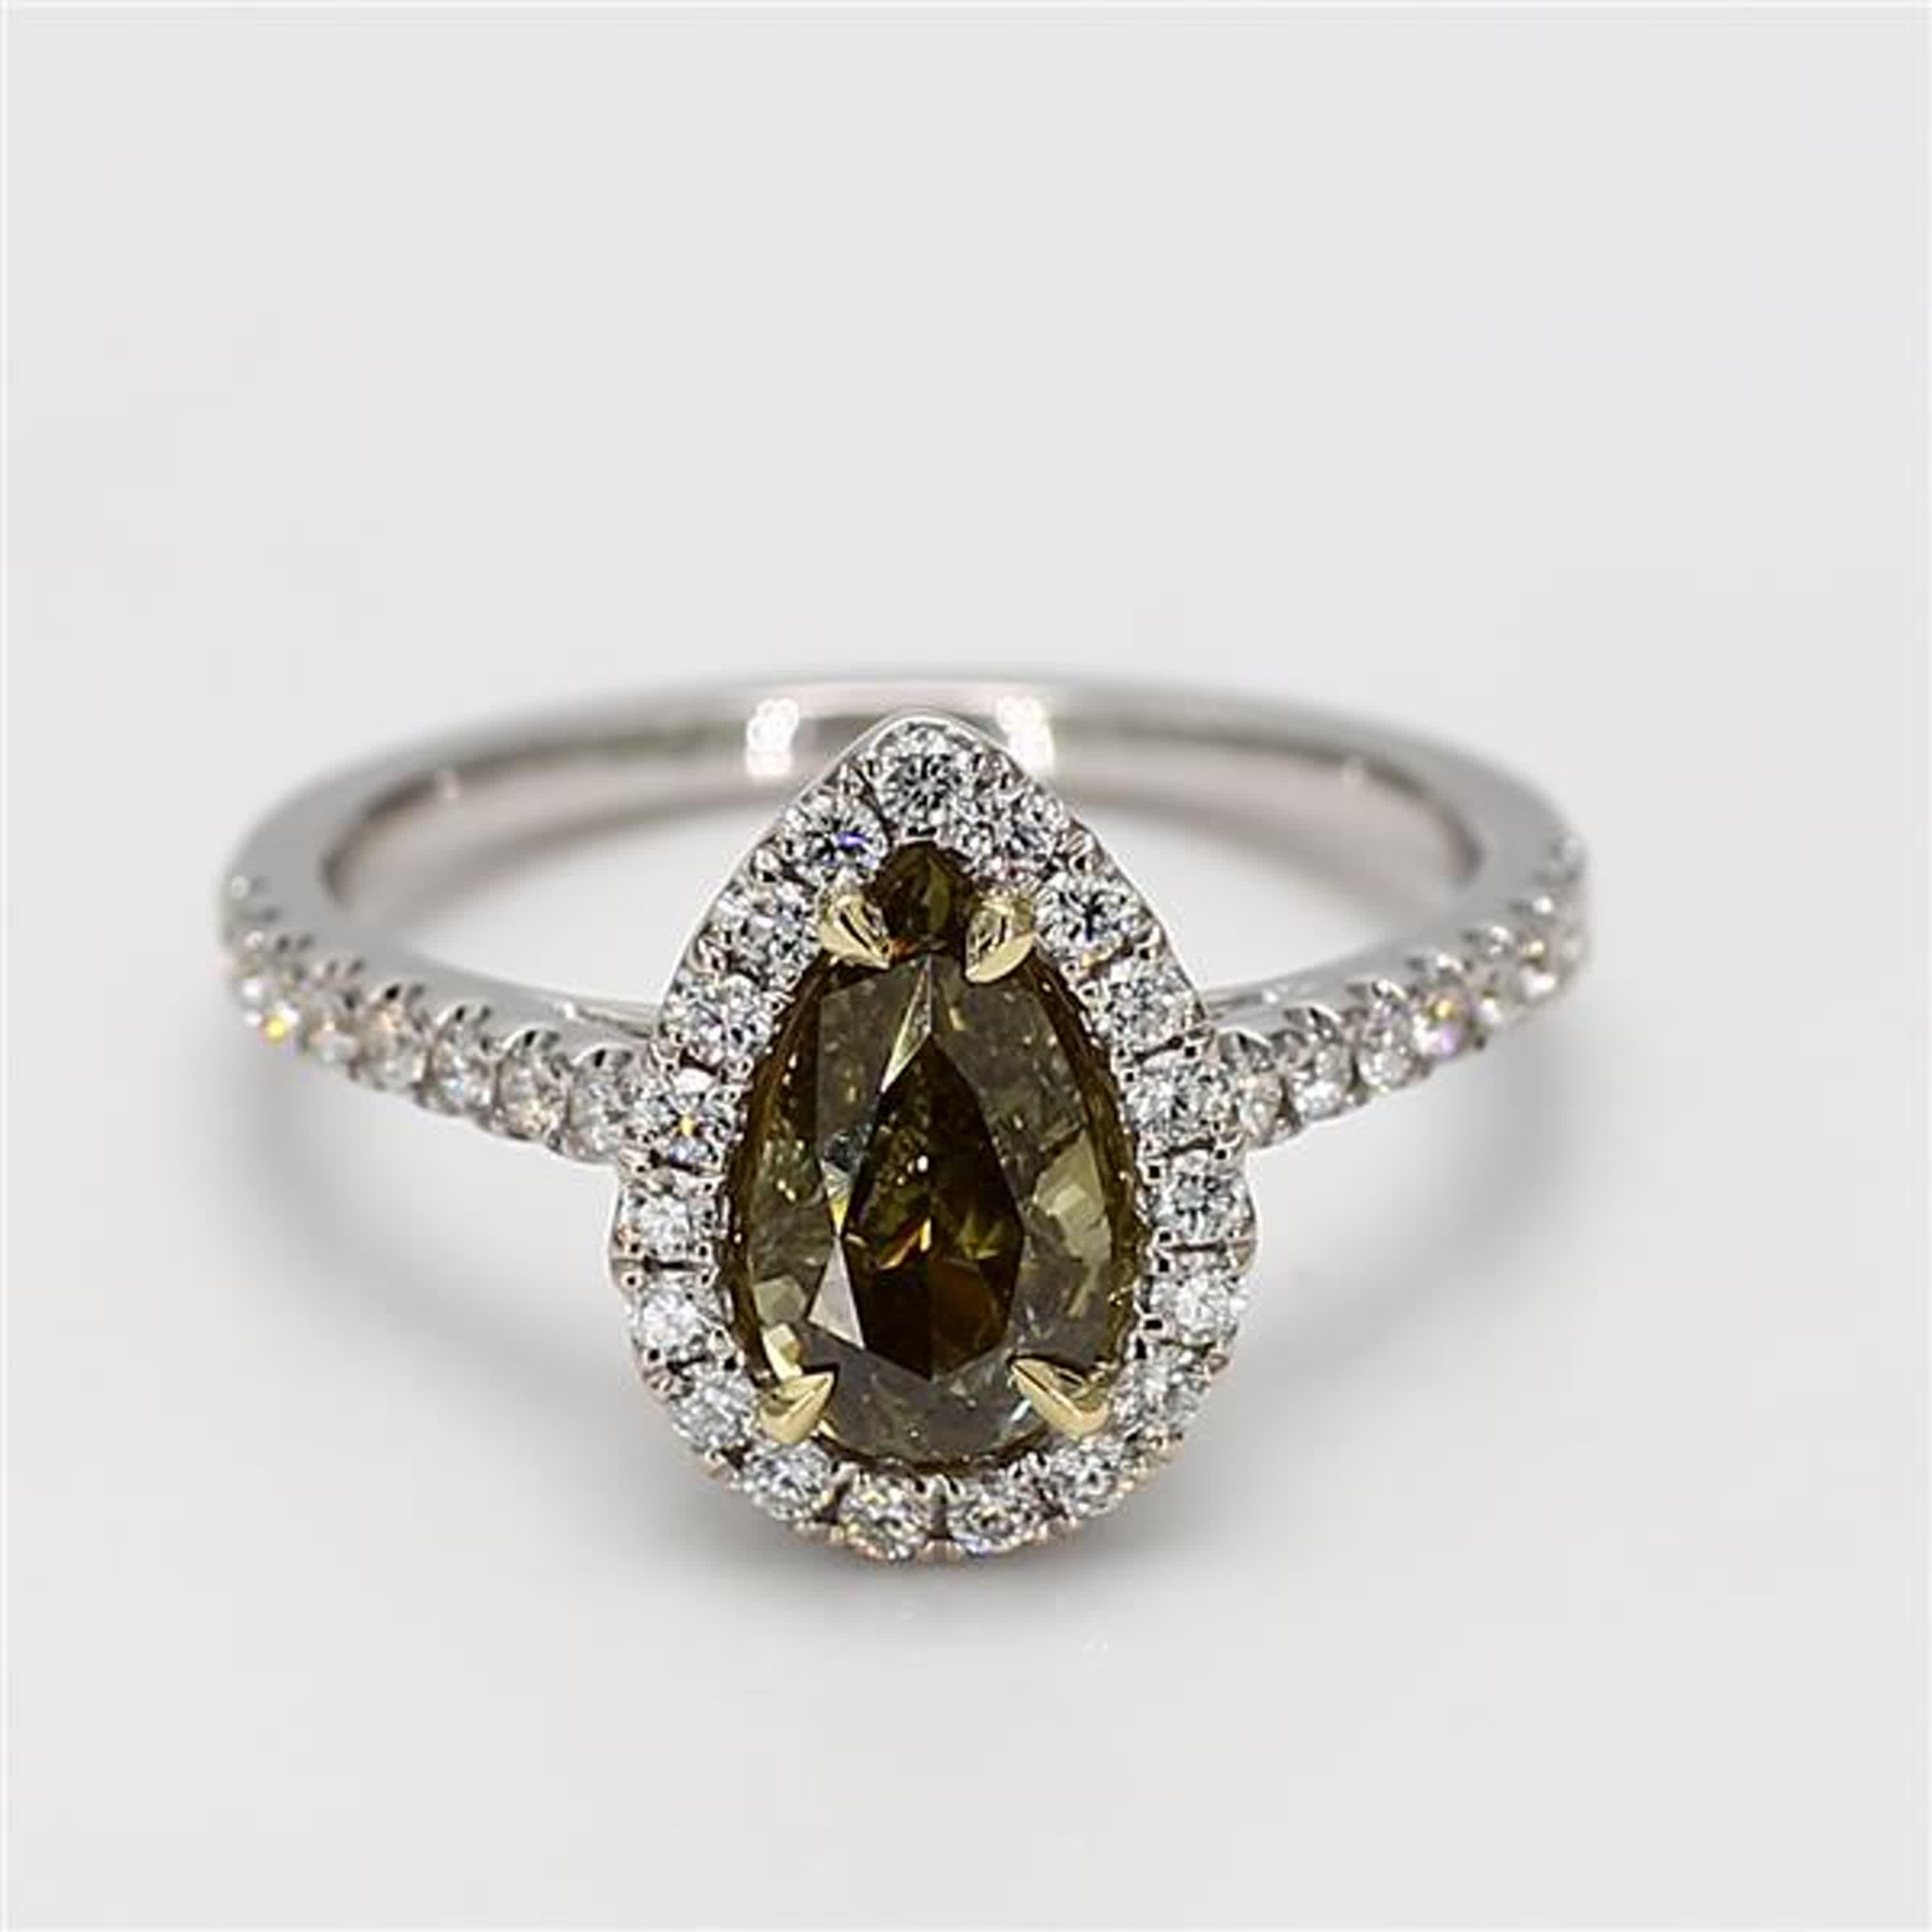 RareGemWorld's classic GIA certified diamond ring. Mounted in a beautiful 18K Yellow and White Gold setting with a natural pear cut green diamond. The green diamond is surrounded by round natural white diamond melee. This ring is guaranteed to